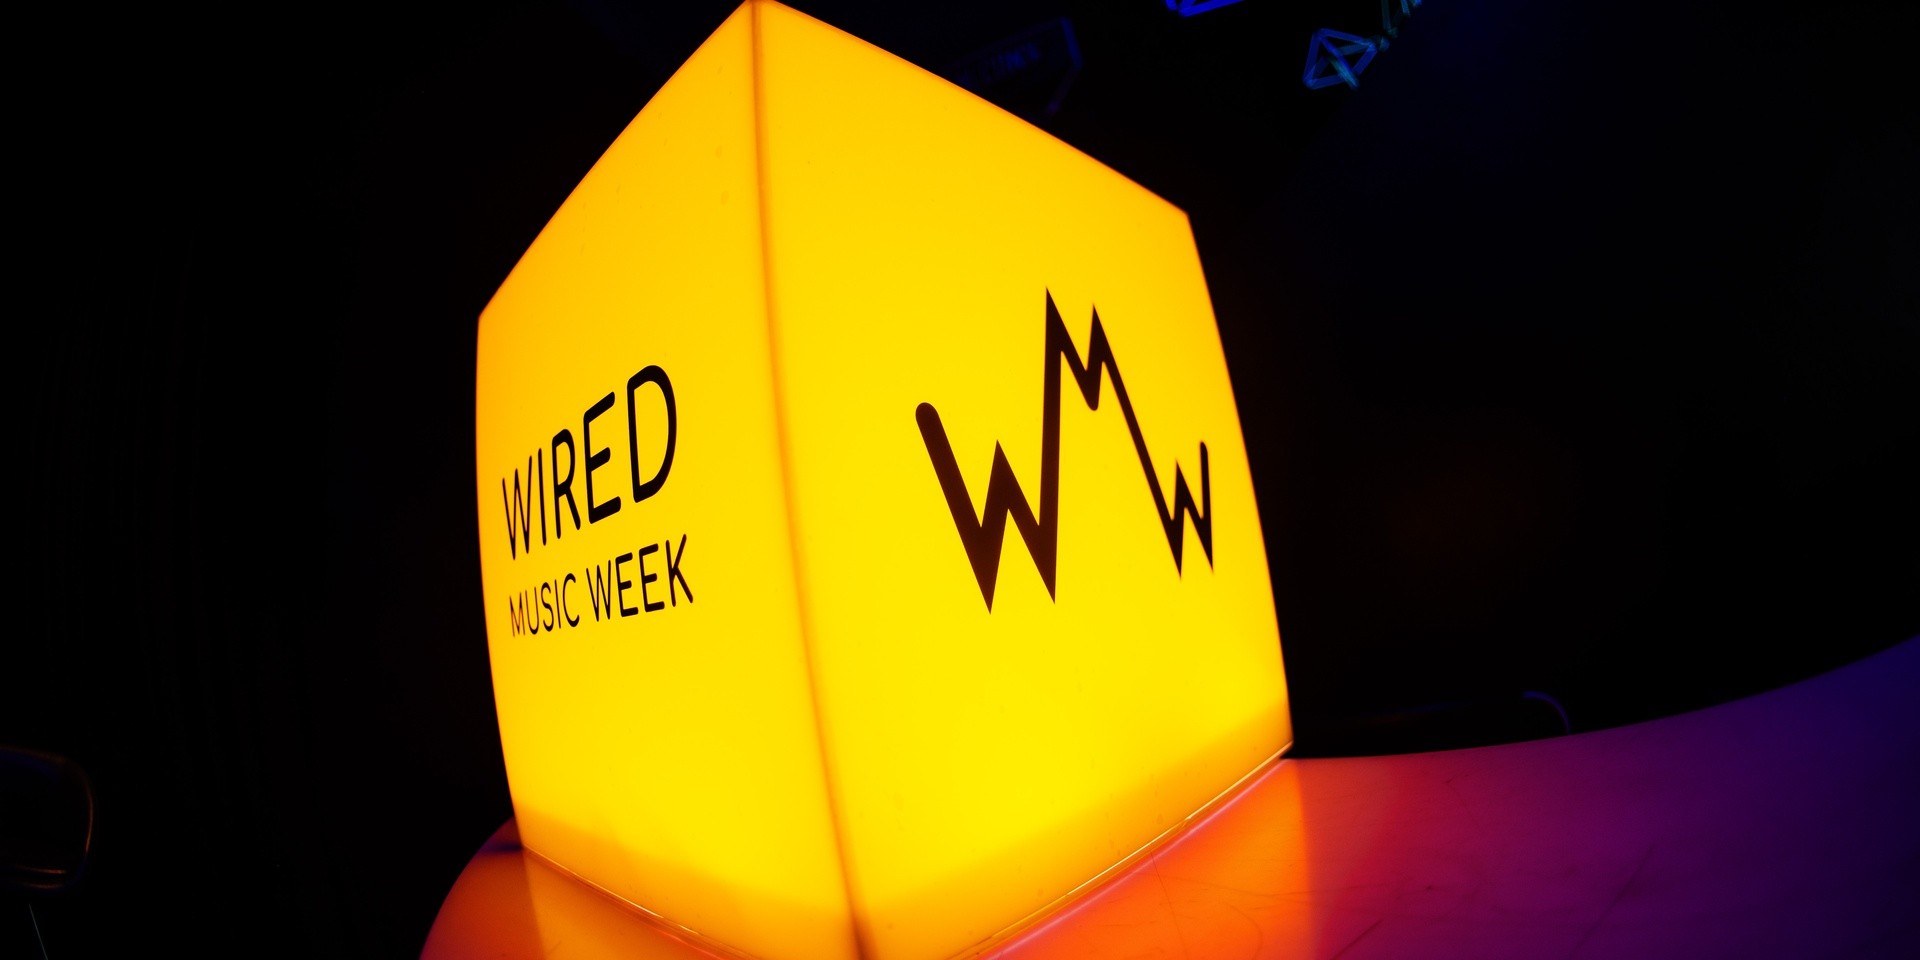 Wired Music Week announces partnership with Zouk Genting and elevated experiences for 2020 return